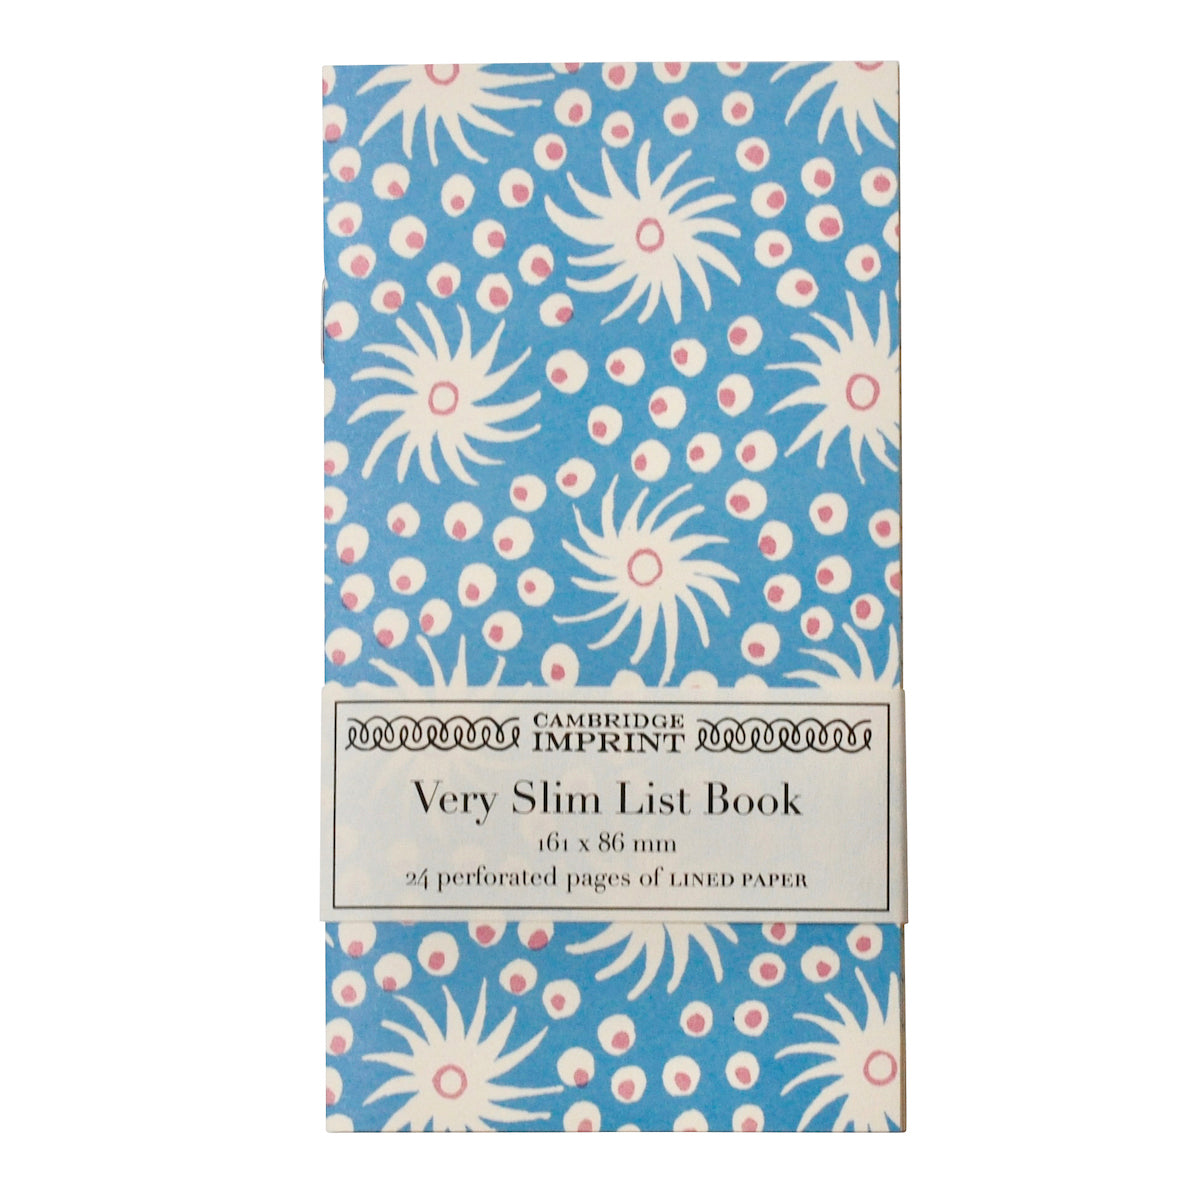 Very Slim List Book Milky Way Blue and Pink